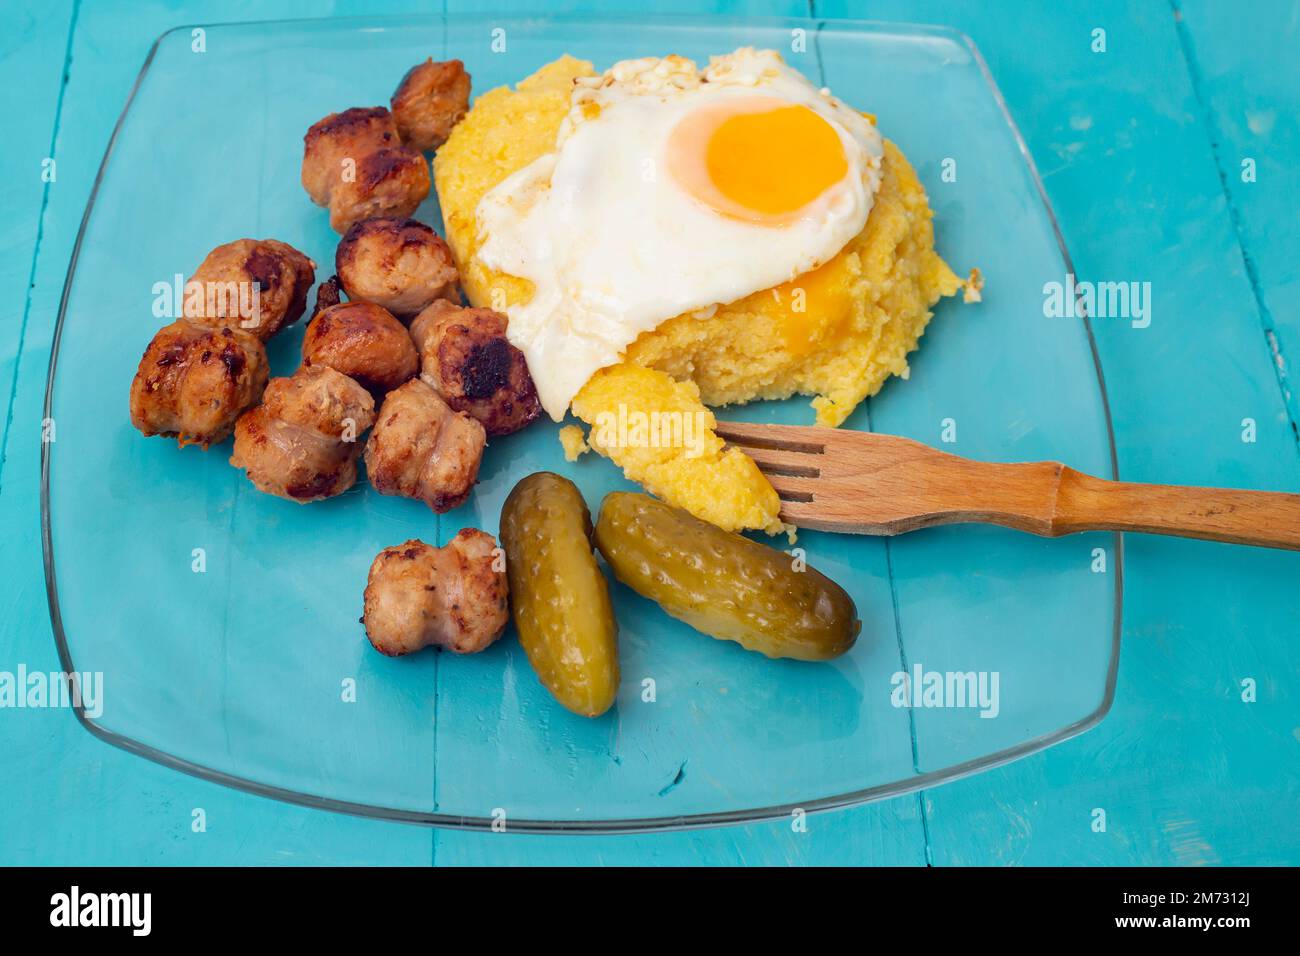 Romanian traditional food, fried sausages, soft egg and 'mamaliga', side view close up, on blue background Stock Photo